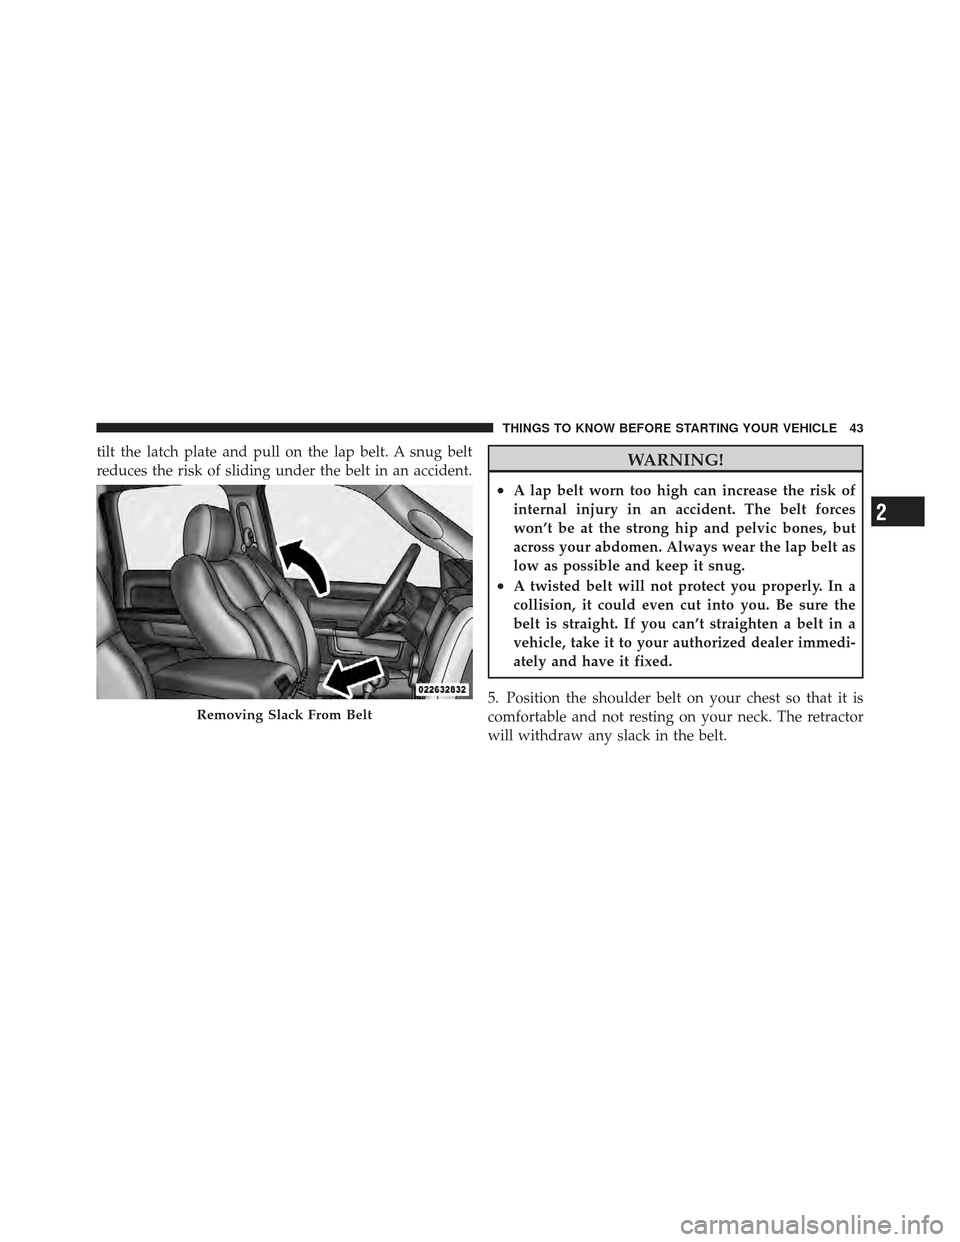 Ram 1500 2011 Service Manual tilt the latch plate and pull on the lap belt. A snug belt
reduces the risk of sliding under the belt in an accident.WARNING!
•A lap belt worn too high can increase the risk of
internal injury in an